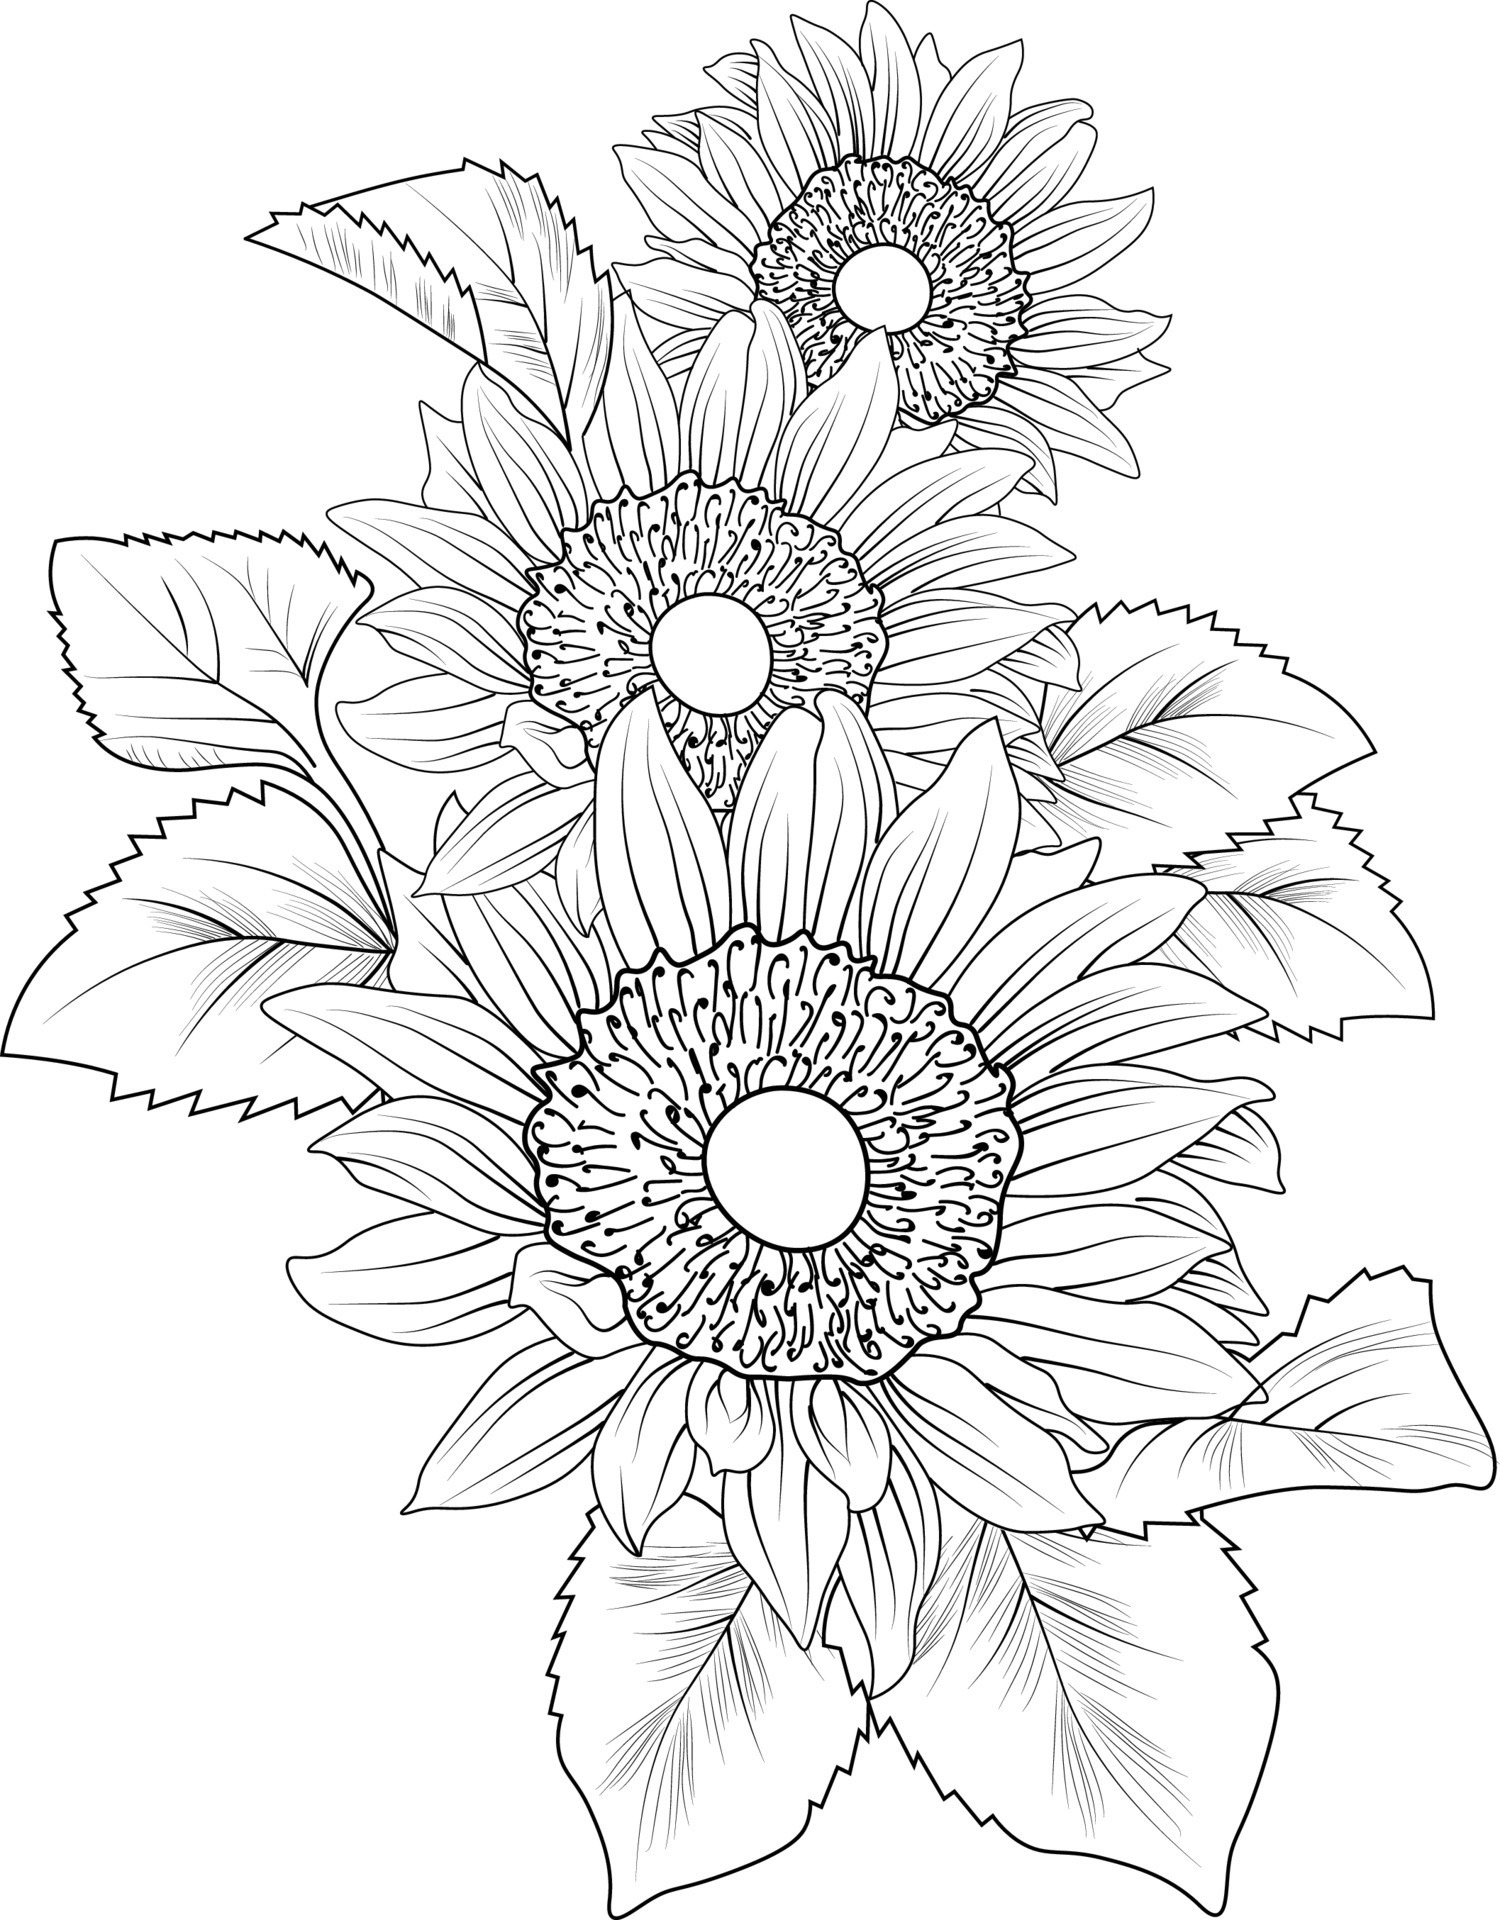 Gray flowers illustration Sleeve tattoo Flower Drawing Handpainted  sunflower watercolor Painting flower Arranging white png  PNGWing